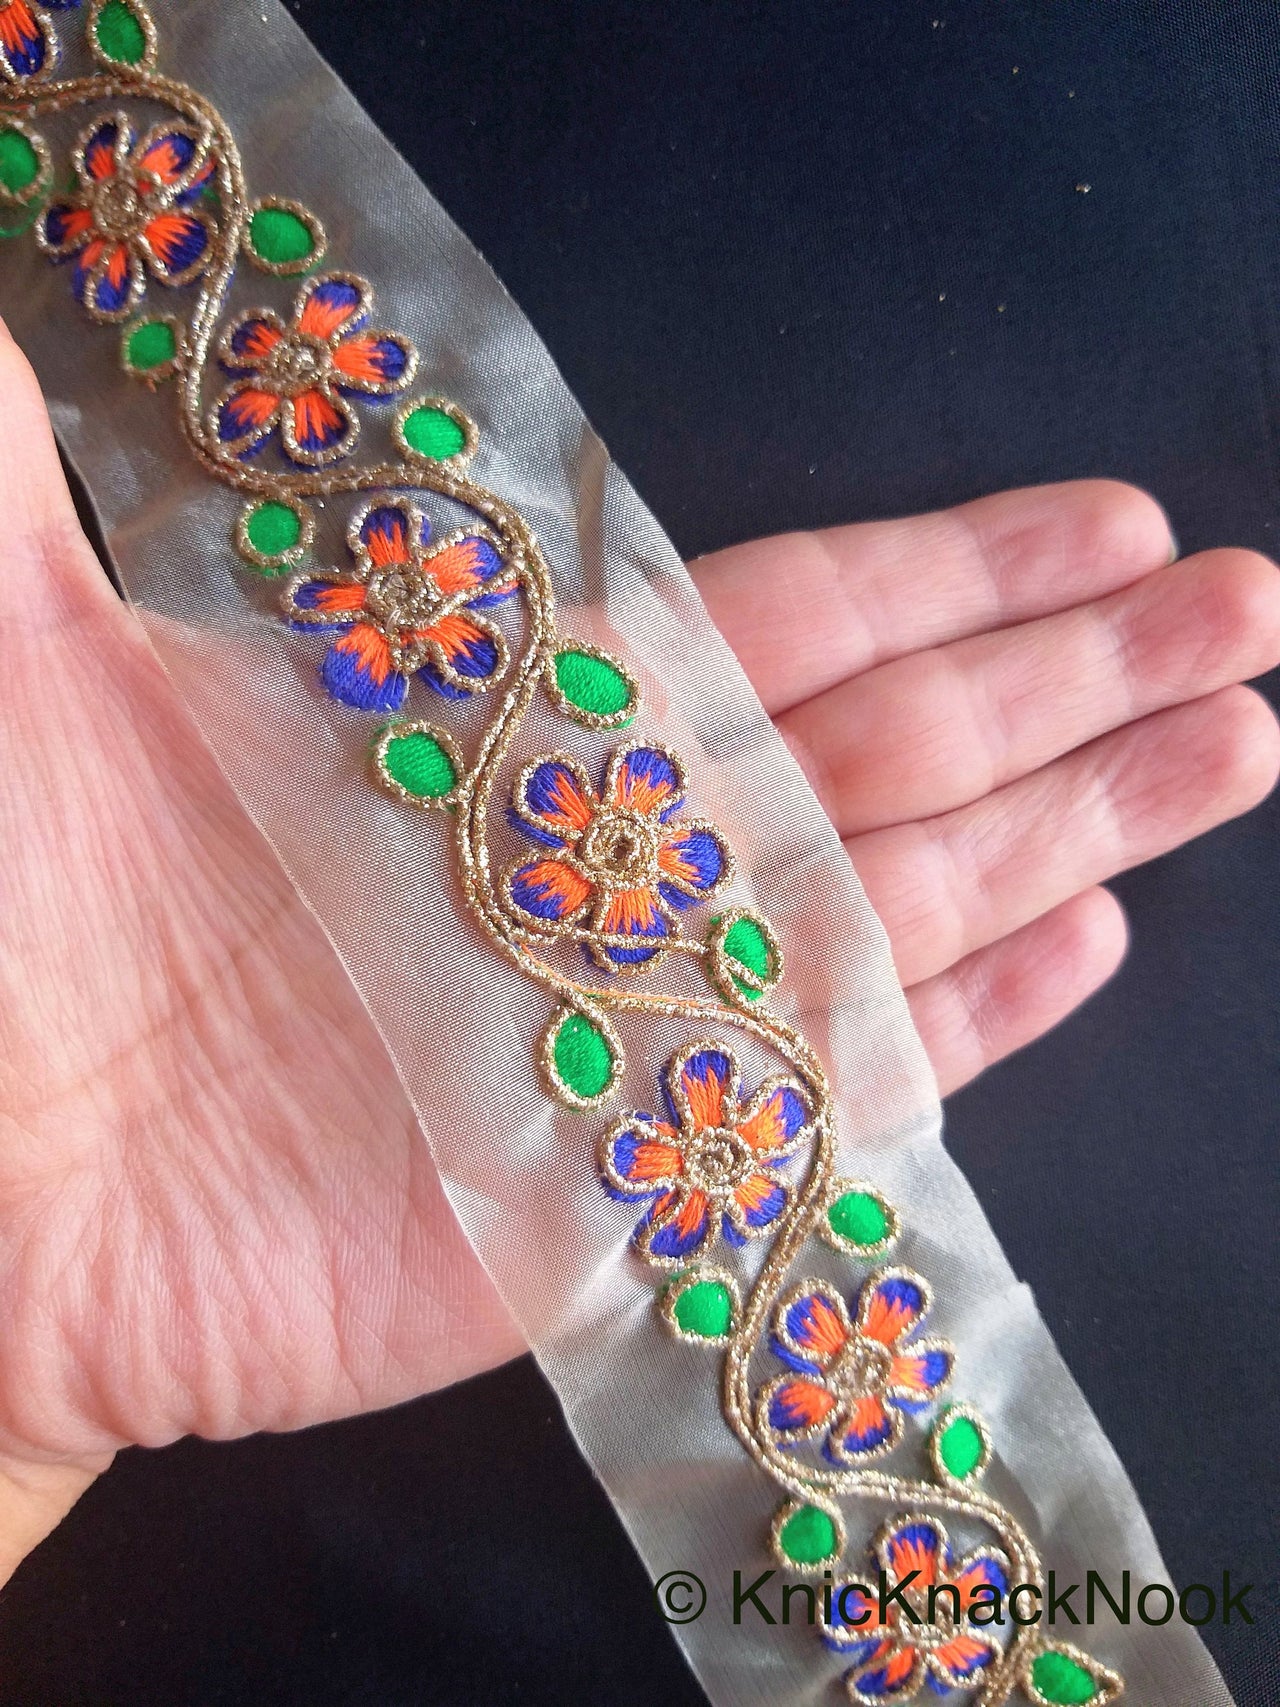 Wholesale Gold Sheer Tissue Fabric Trim With Hand Embroidered  Blue, Orange, Green & Gold Flowers